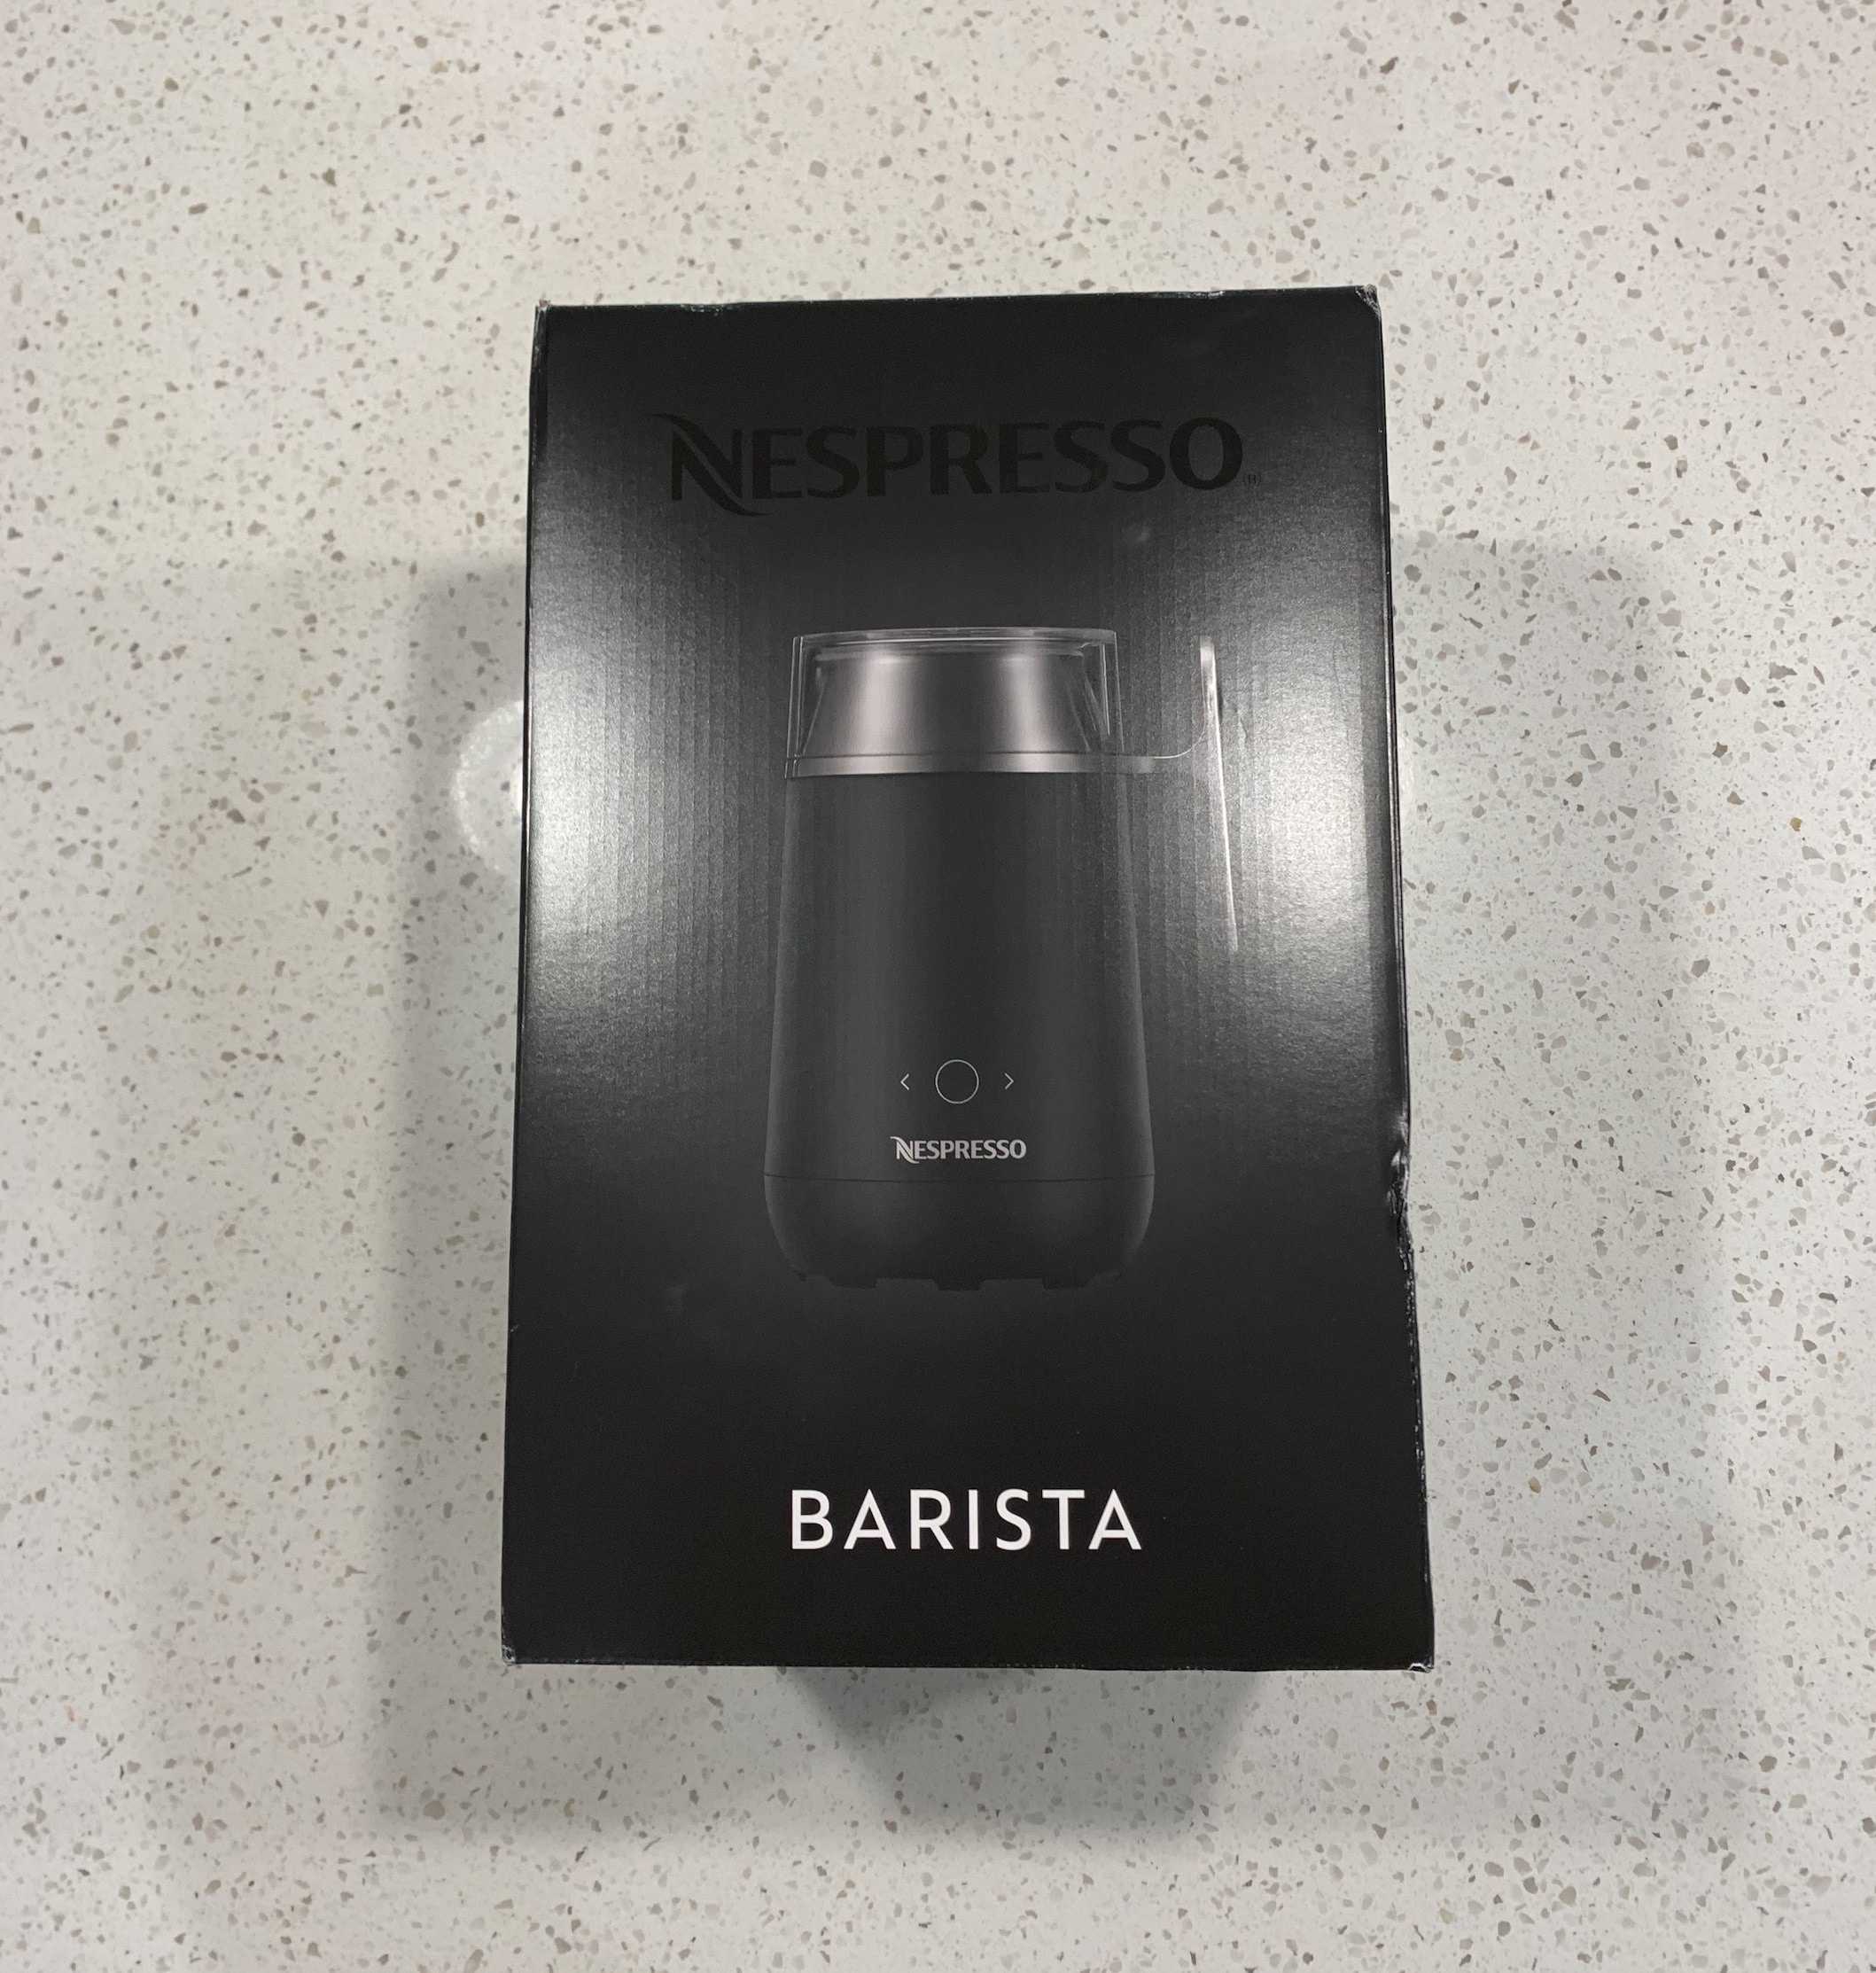 Nespresso Barista Review - The $200 Milk Frother Worth It?